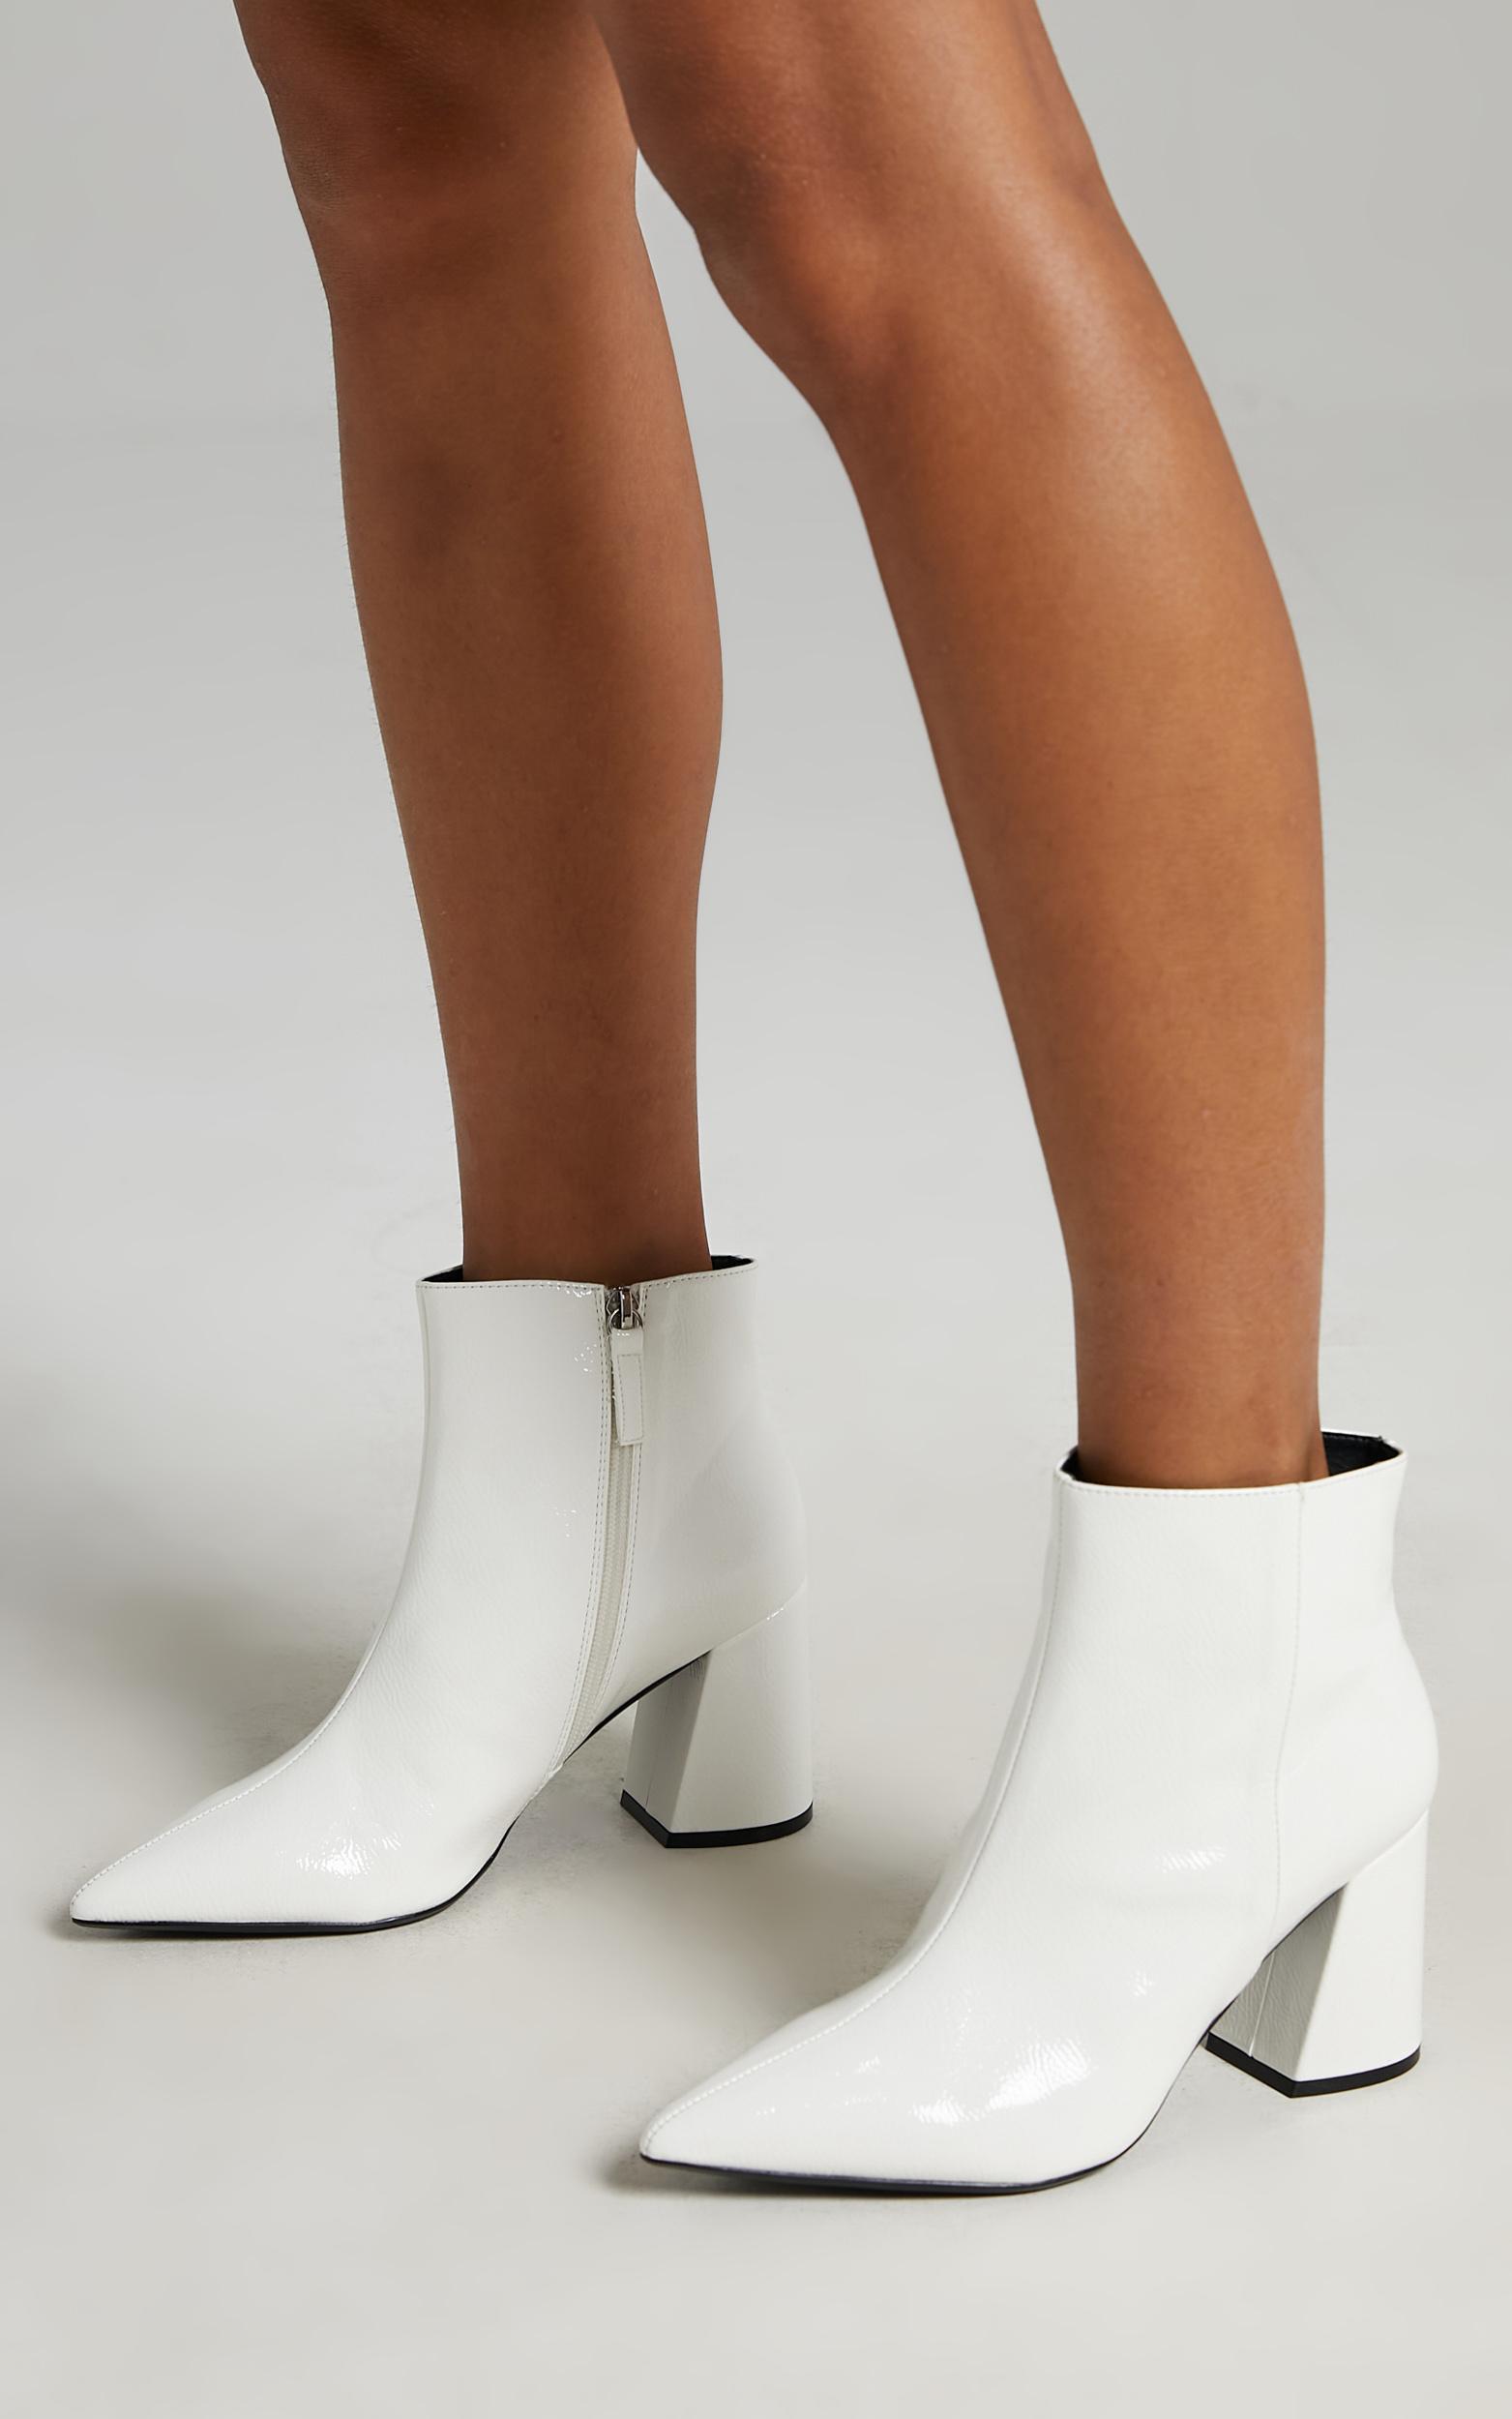 Therapy - Cleo Boots in White Crinkle Patent - 05, WHT3, hi-res image number null